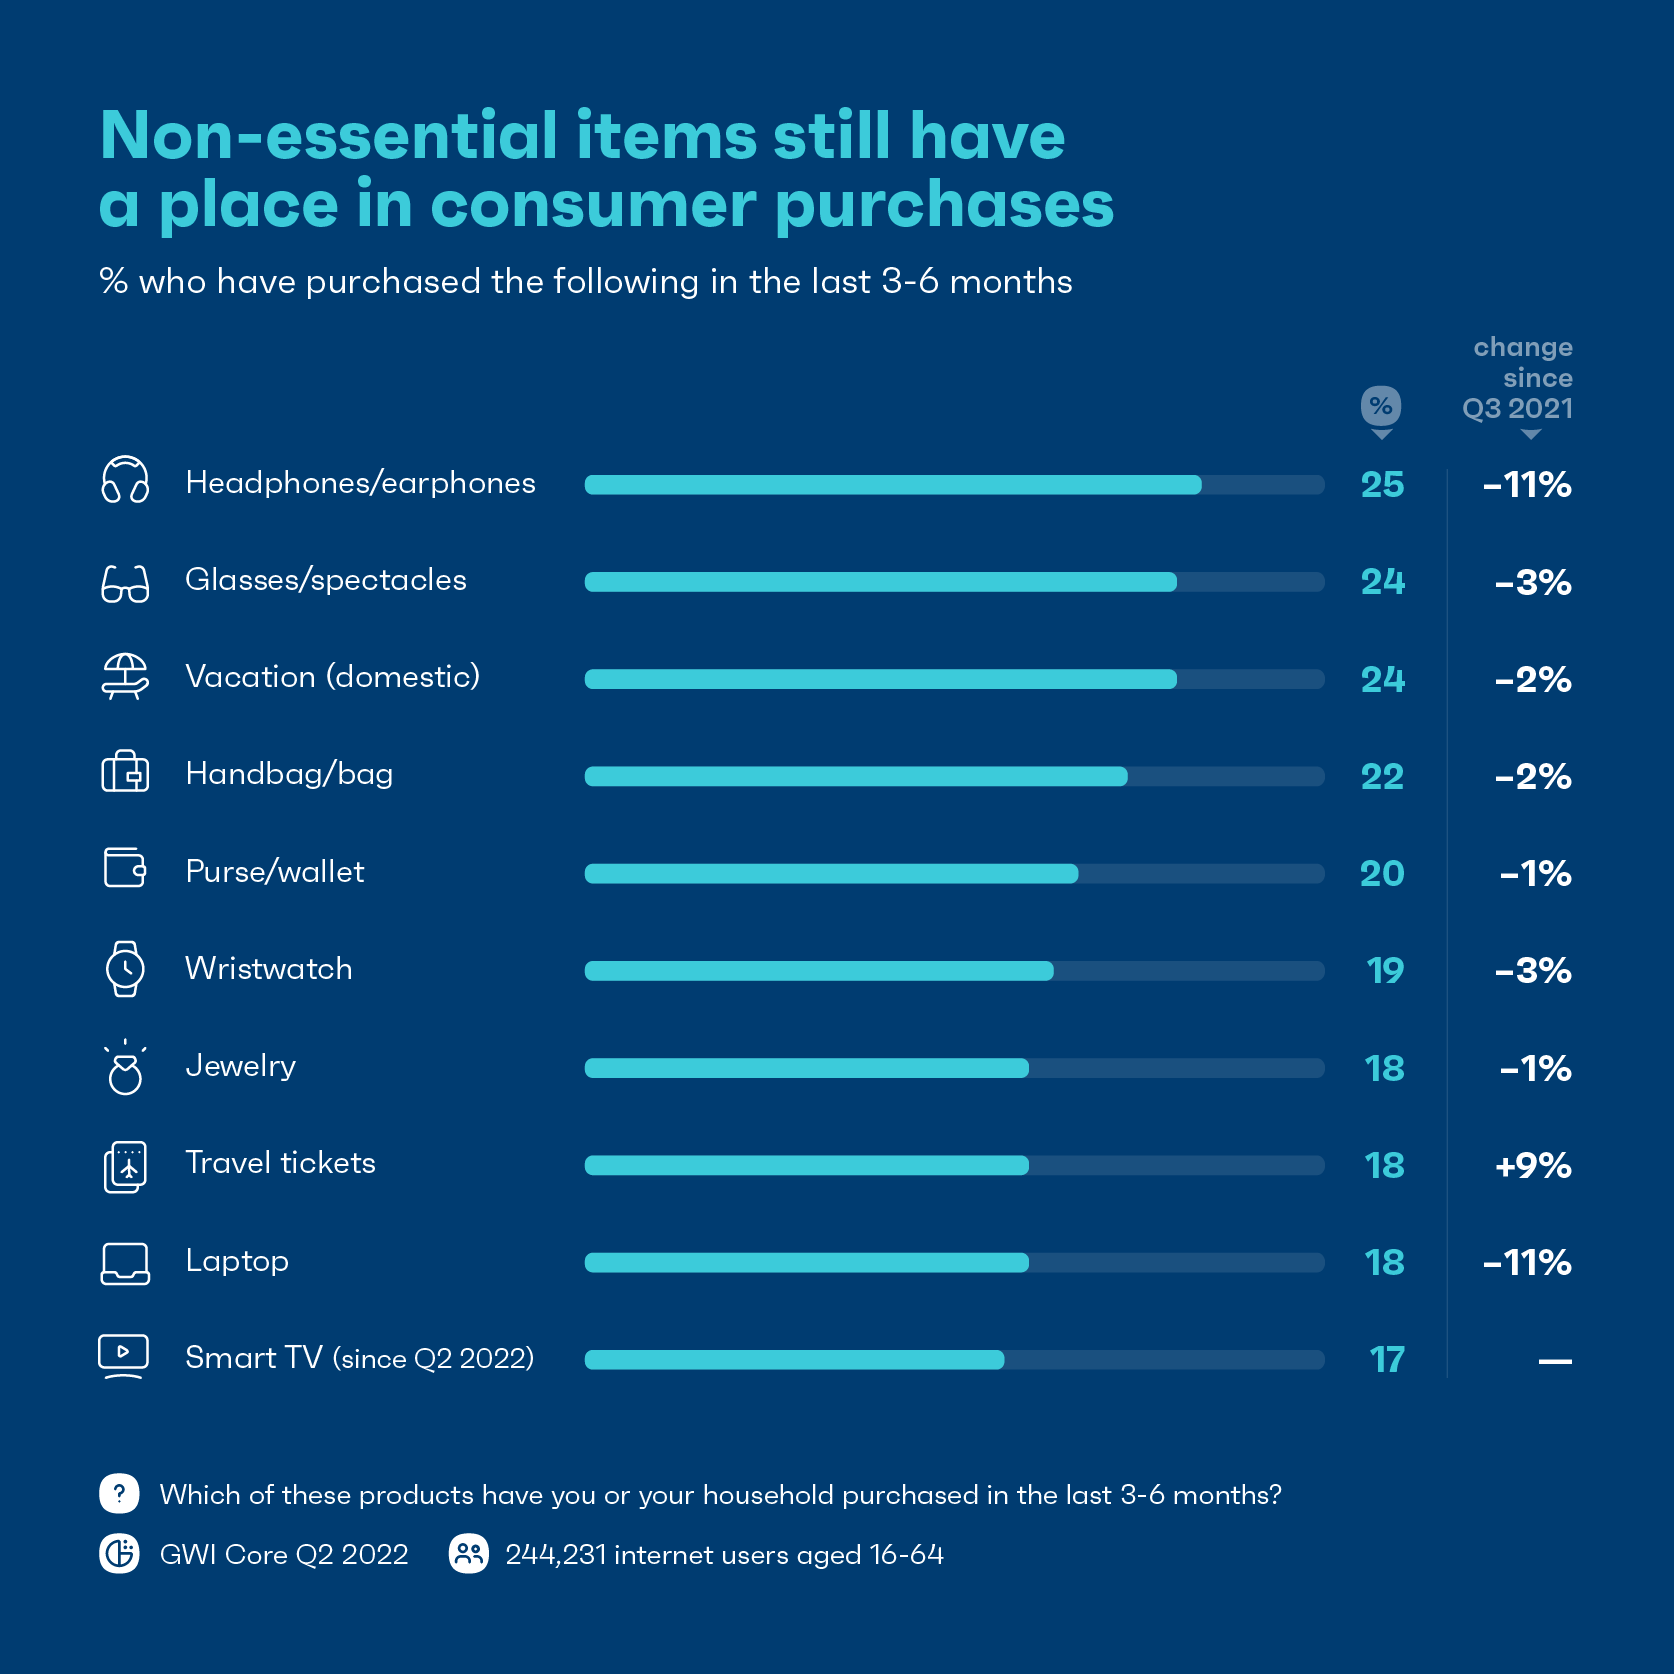 Charts showing which non-essential items consumers are still purchasing